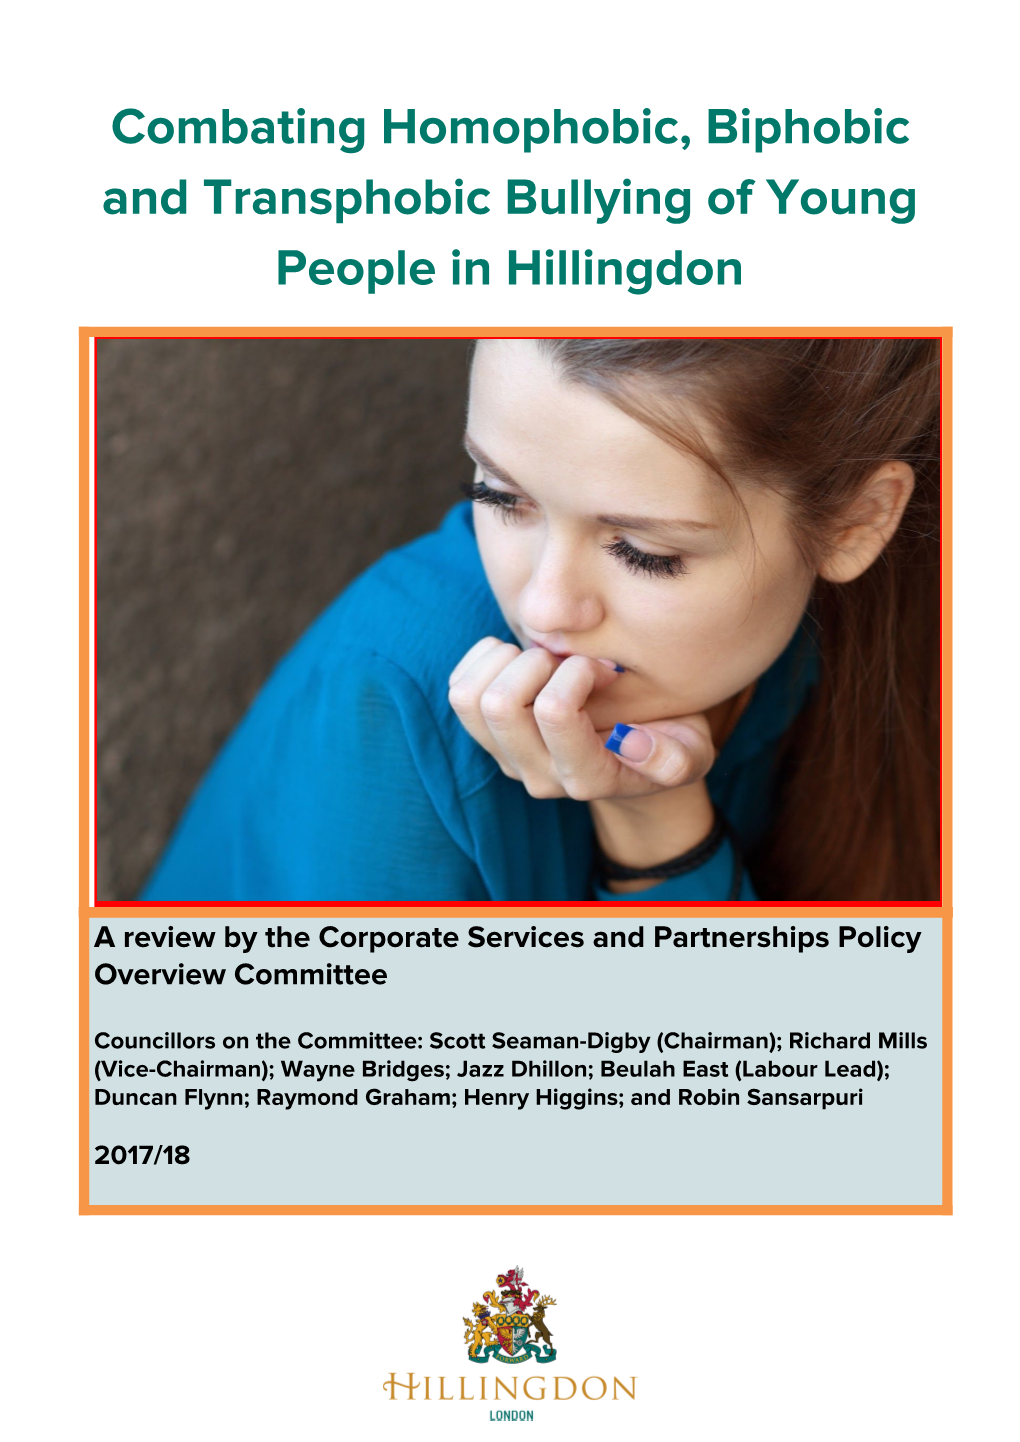 Combating Homophobic, Biphobic and Transphobic Bullying of Young People in Hillingdon